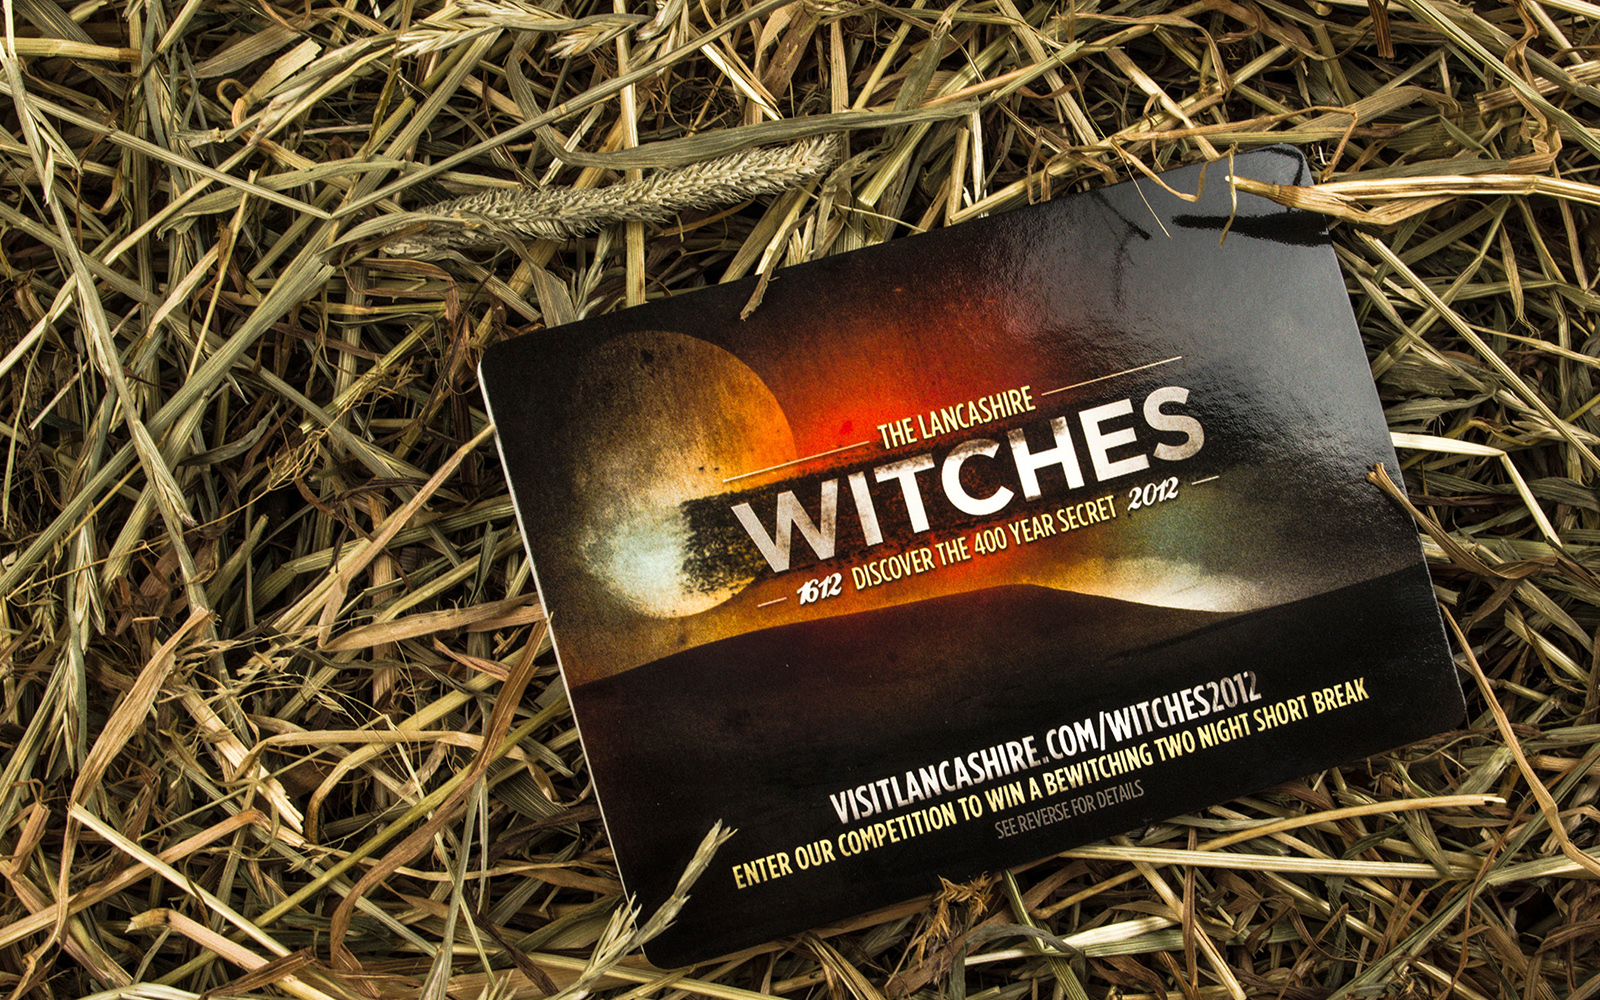 The Lancashire Witches stationery